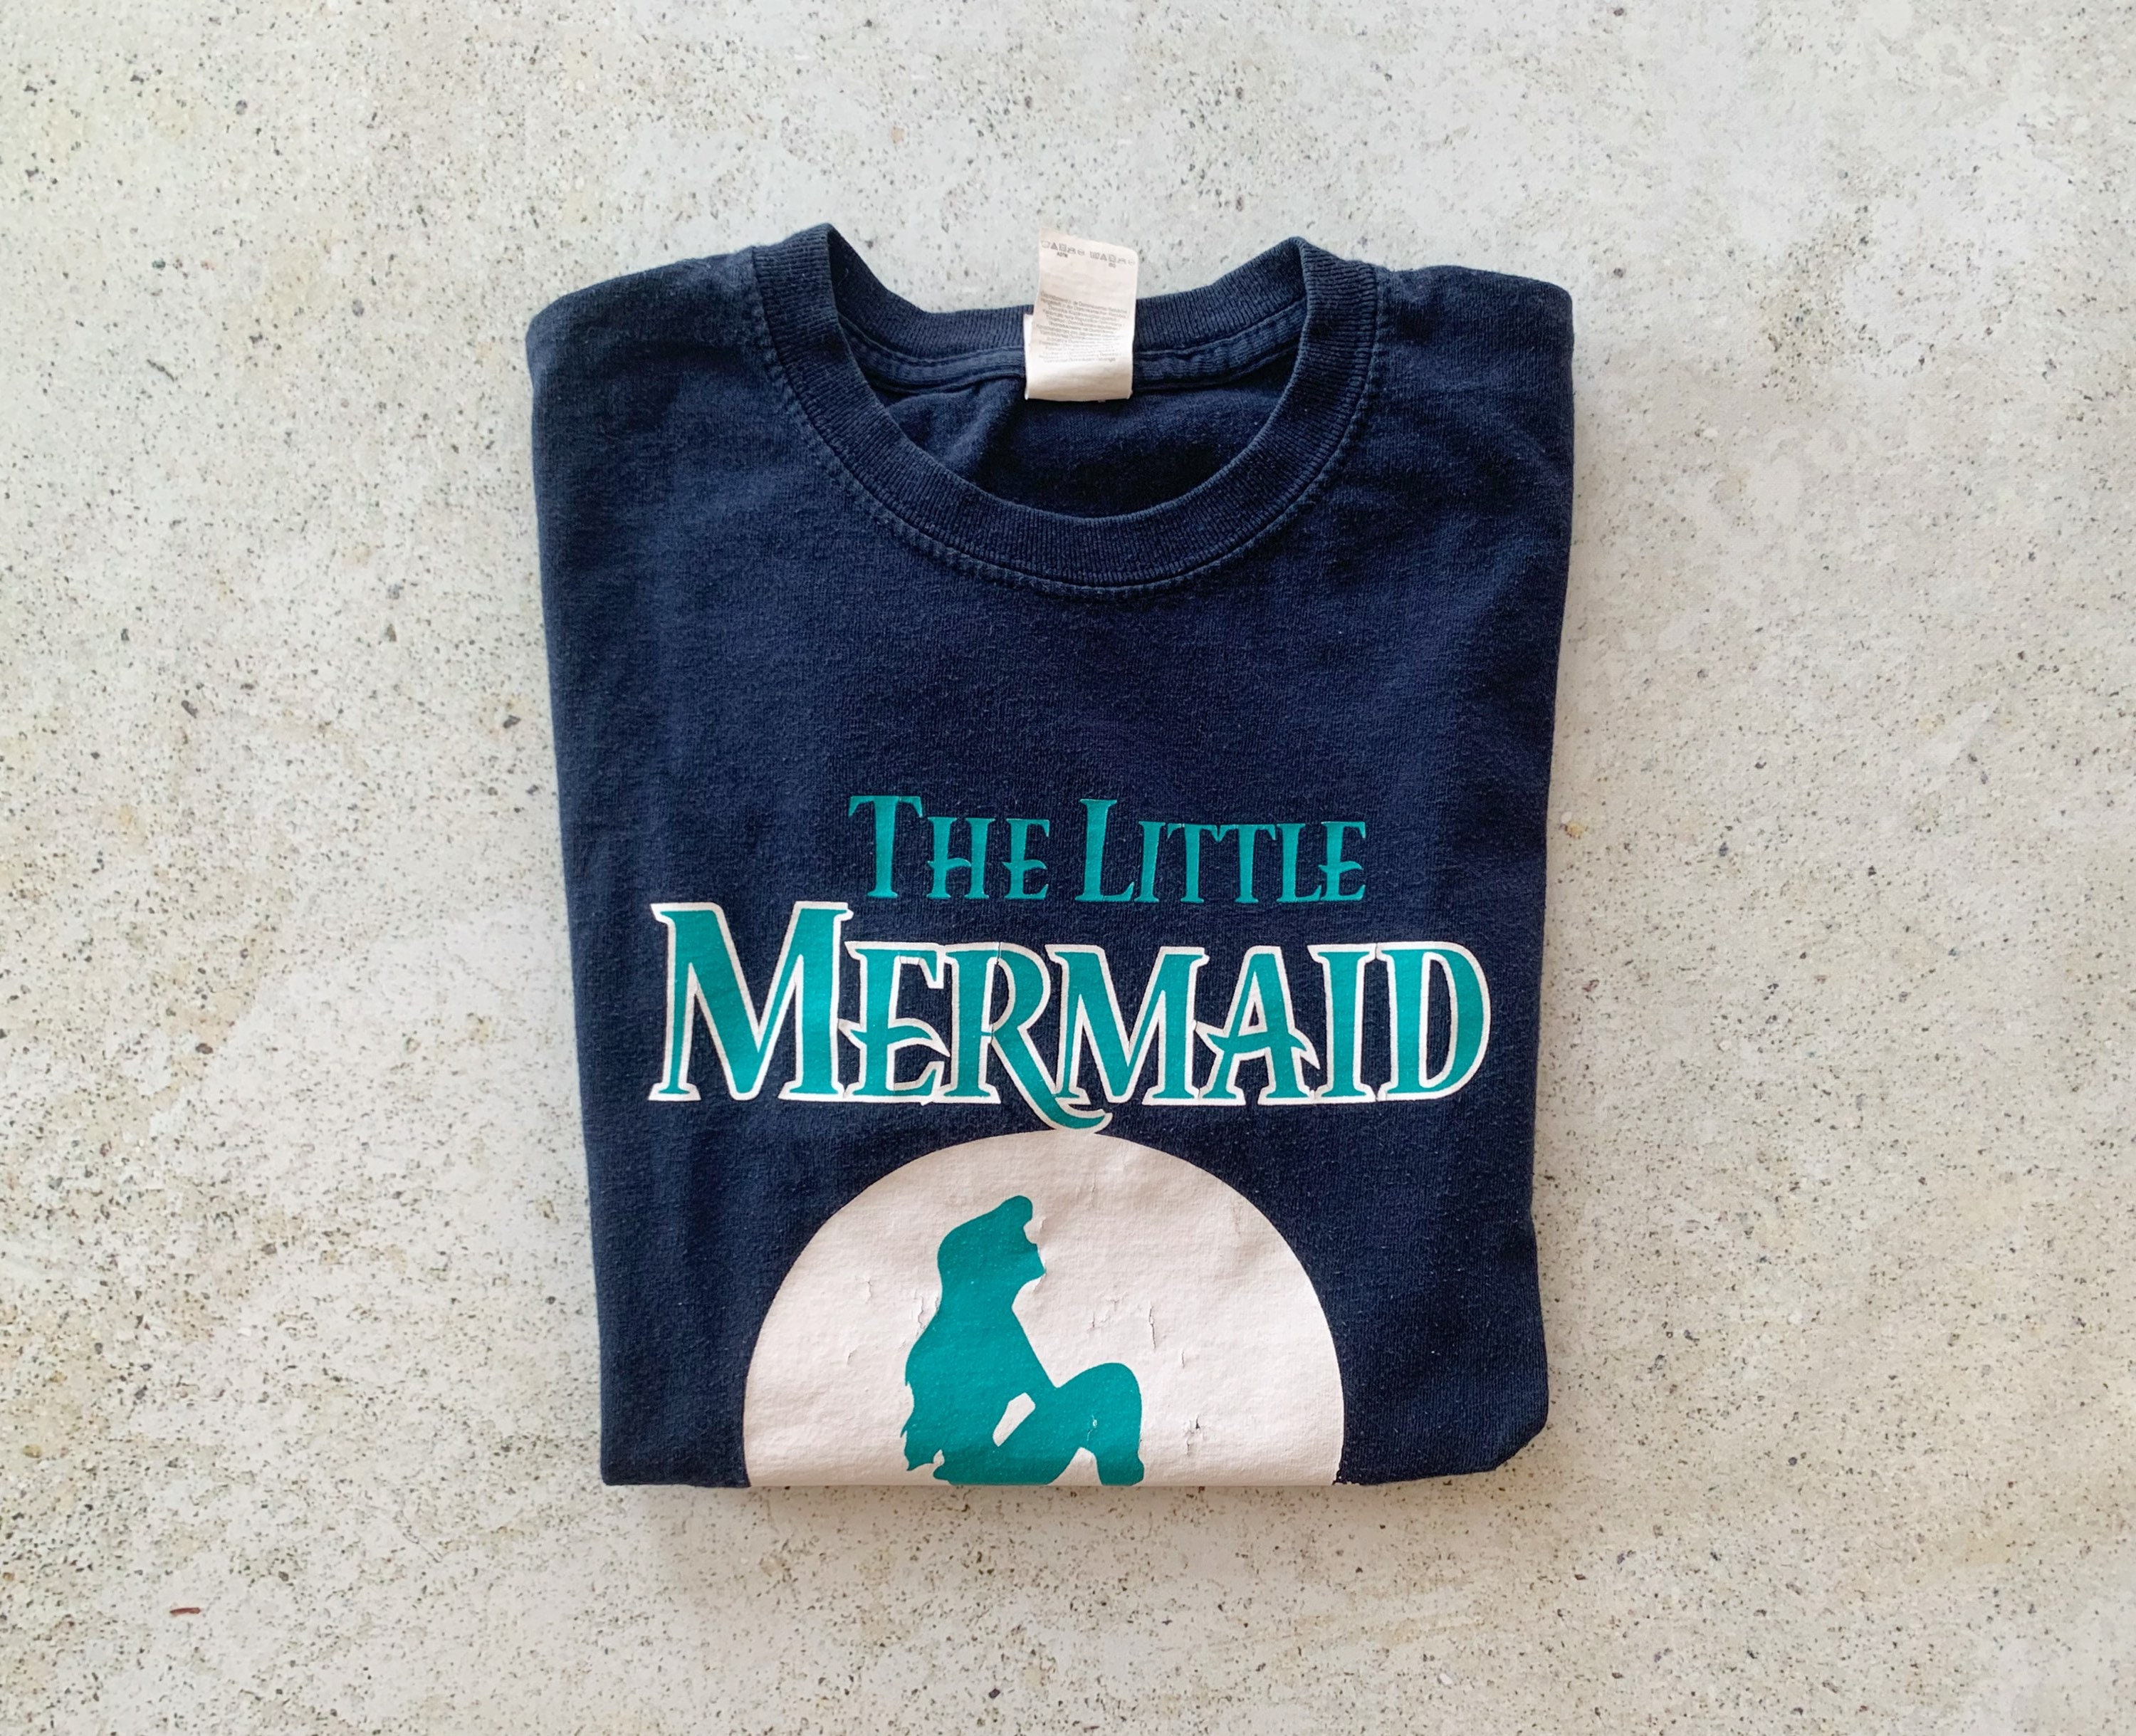 Kleding Meisjeskleding Tops & T-shirts T-shirts T-shirts met print Vintage 1990s Girls The Little Mermaid Tshirt Disney Character Fashions All Over Print Single Stitch Youth Size Small Made in USA 